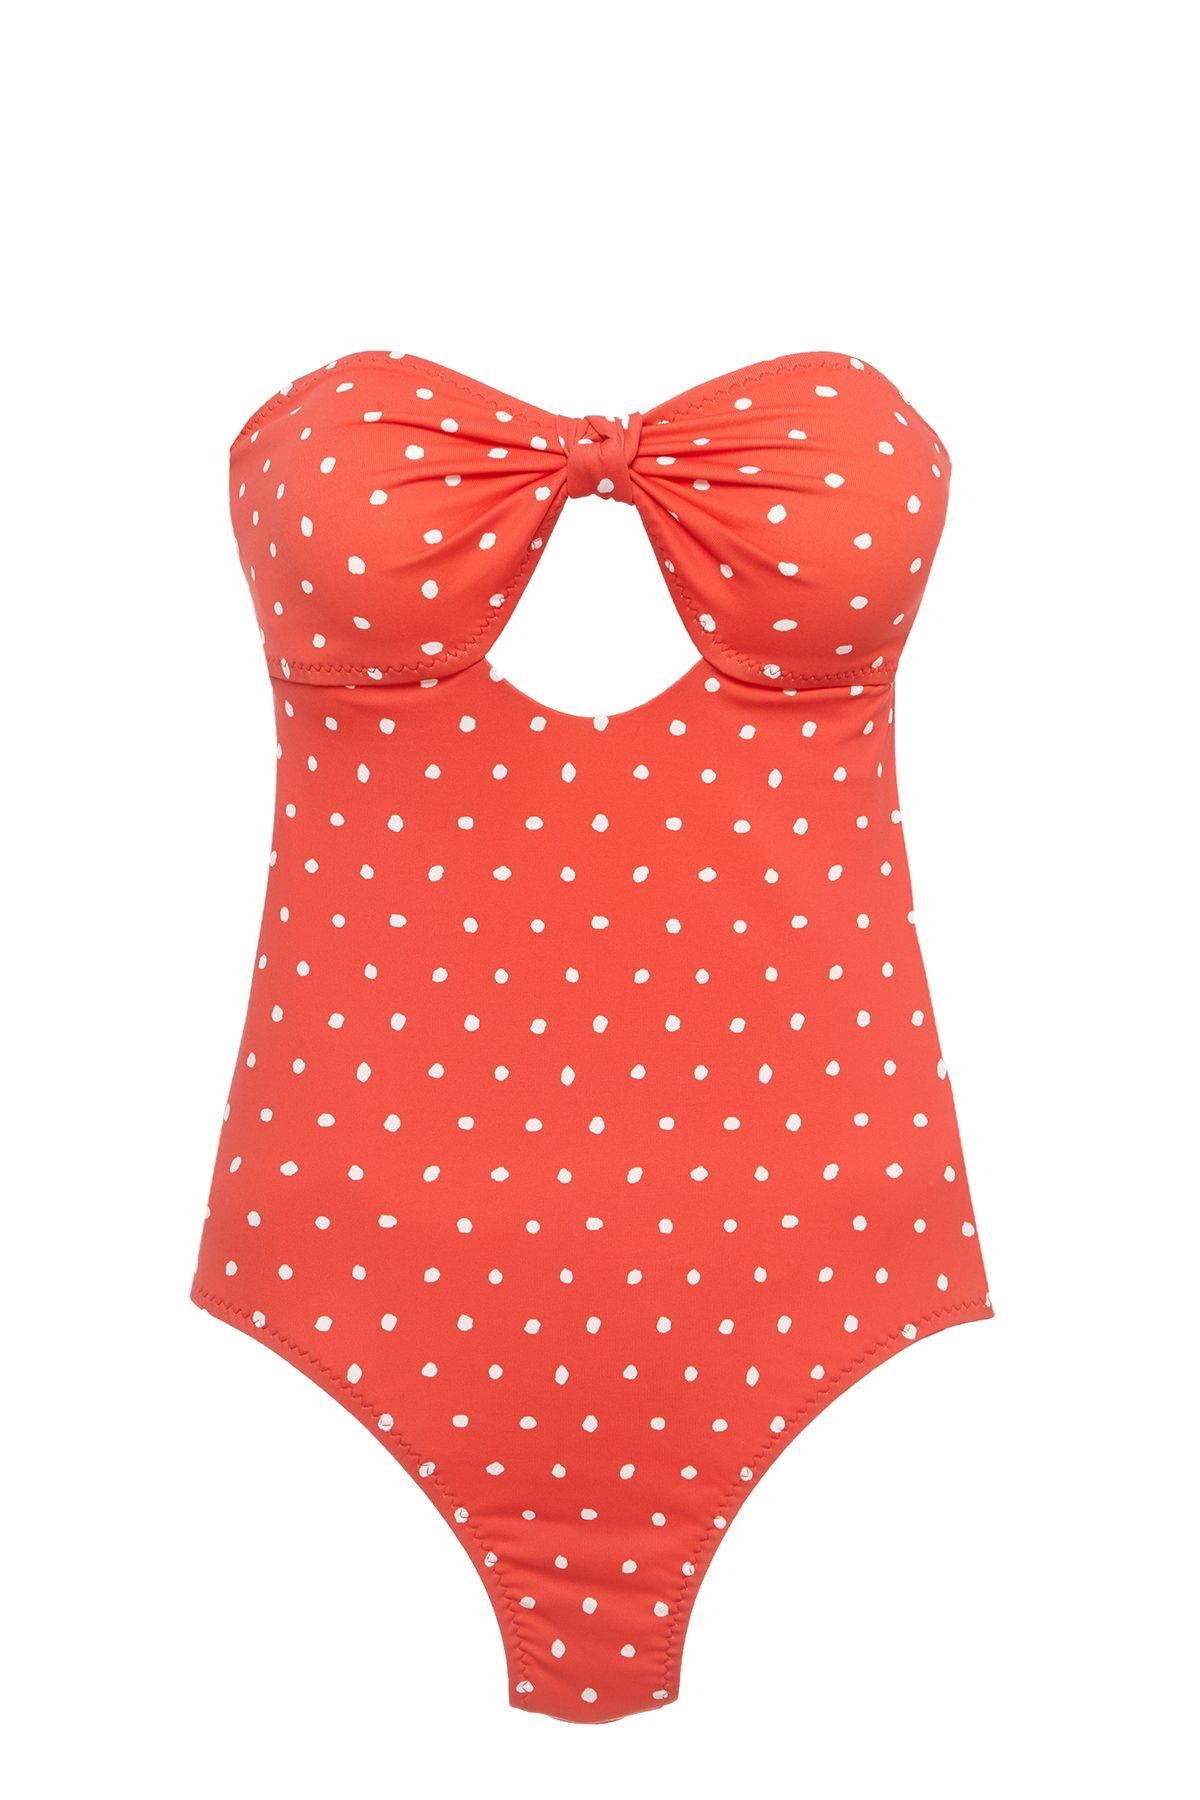 The One Swimsuit That's Part-Bikini, Part One-Piece